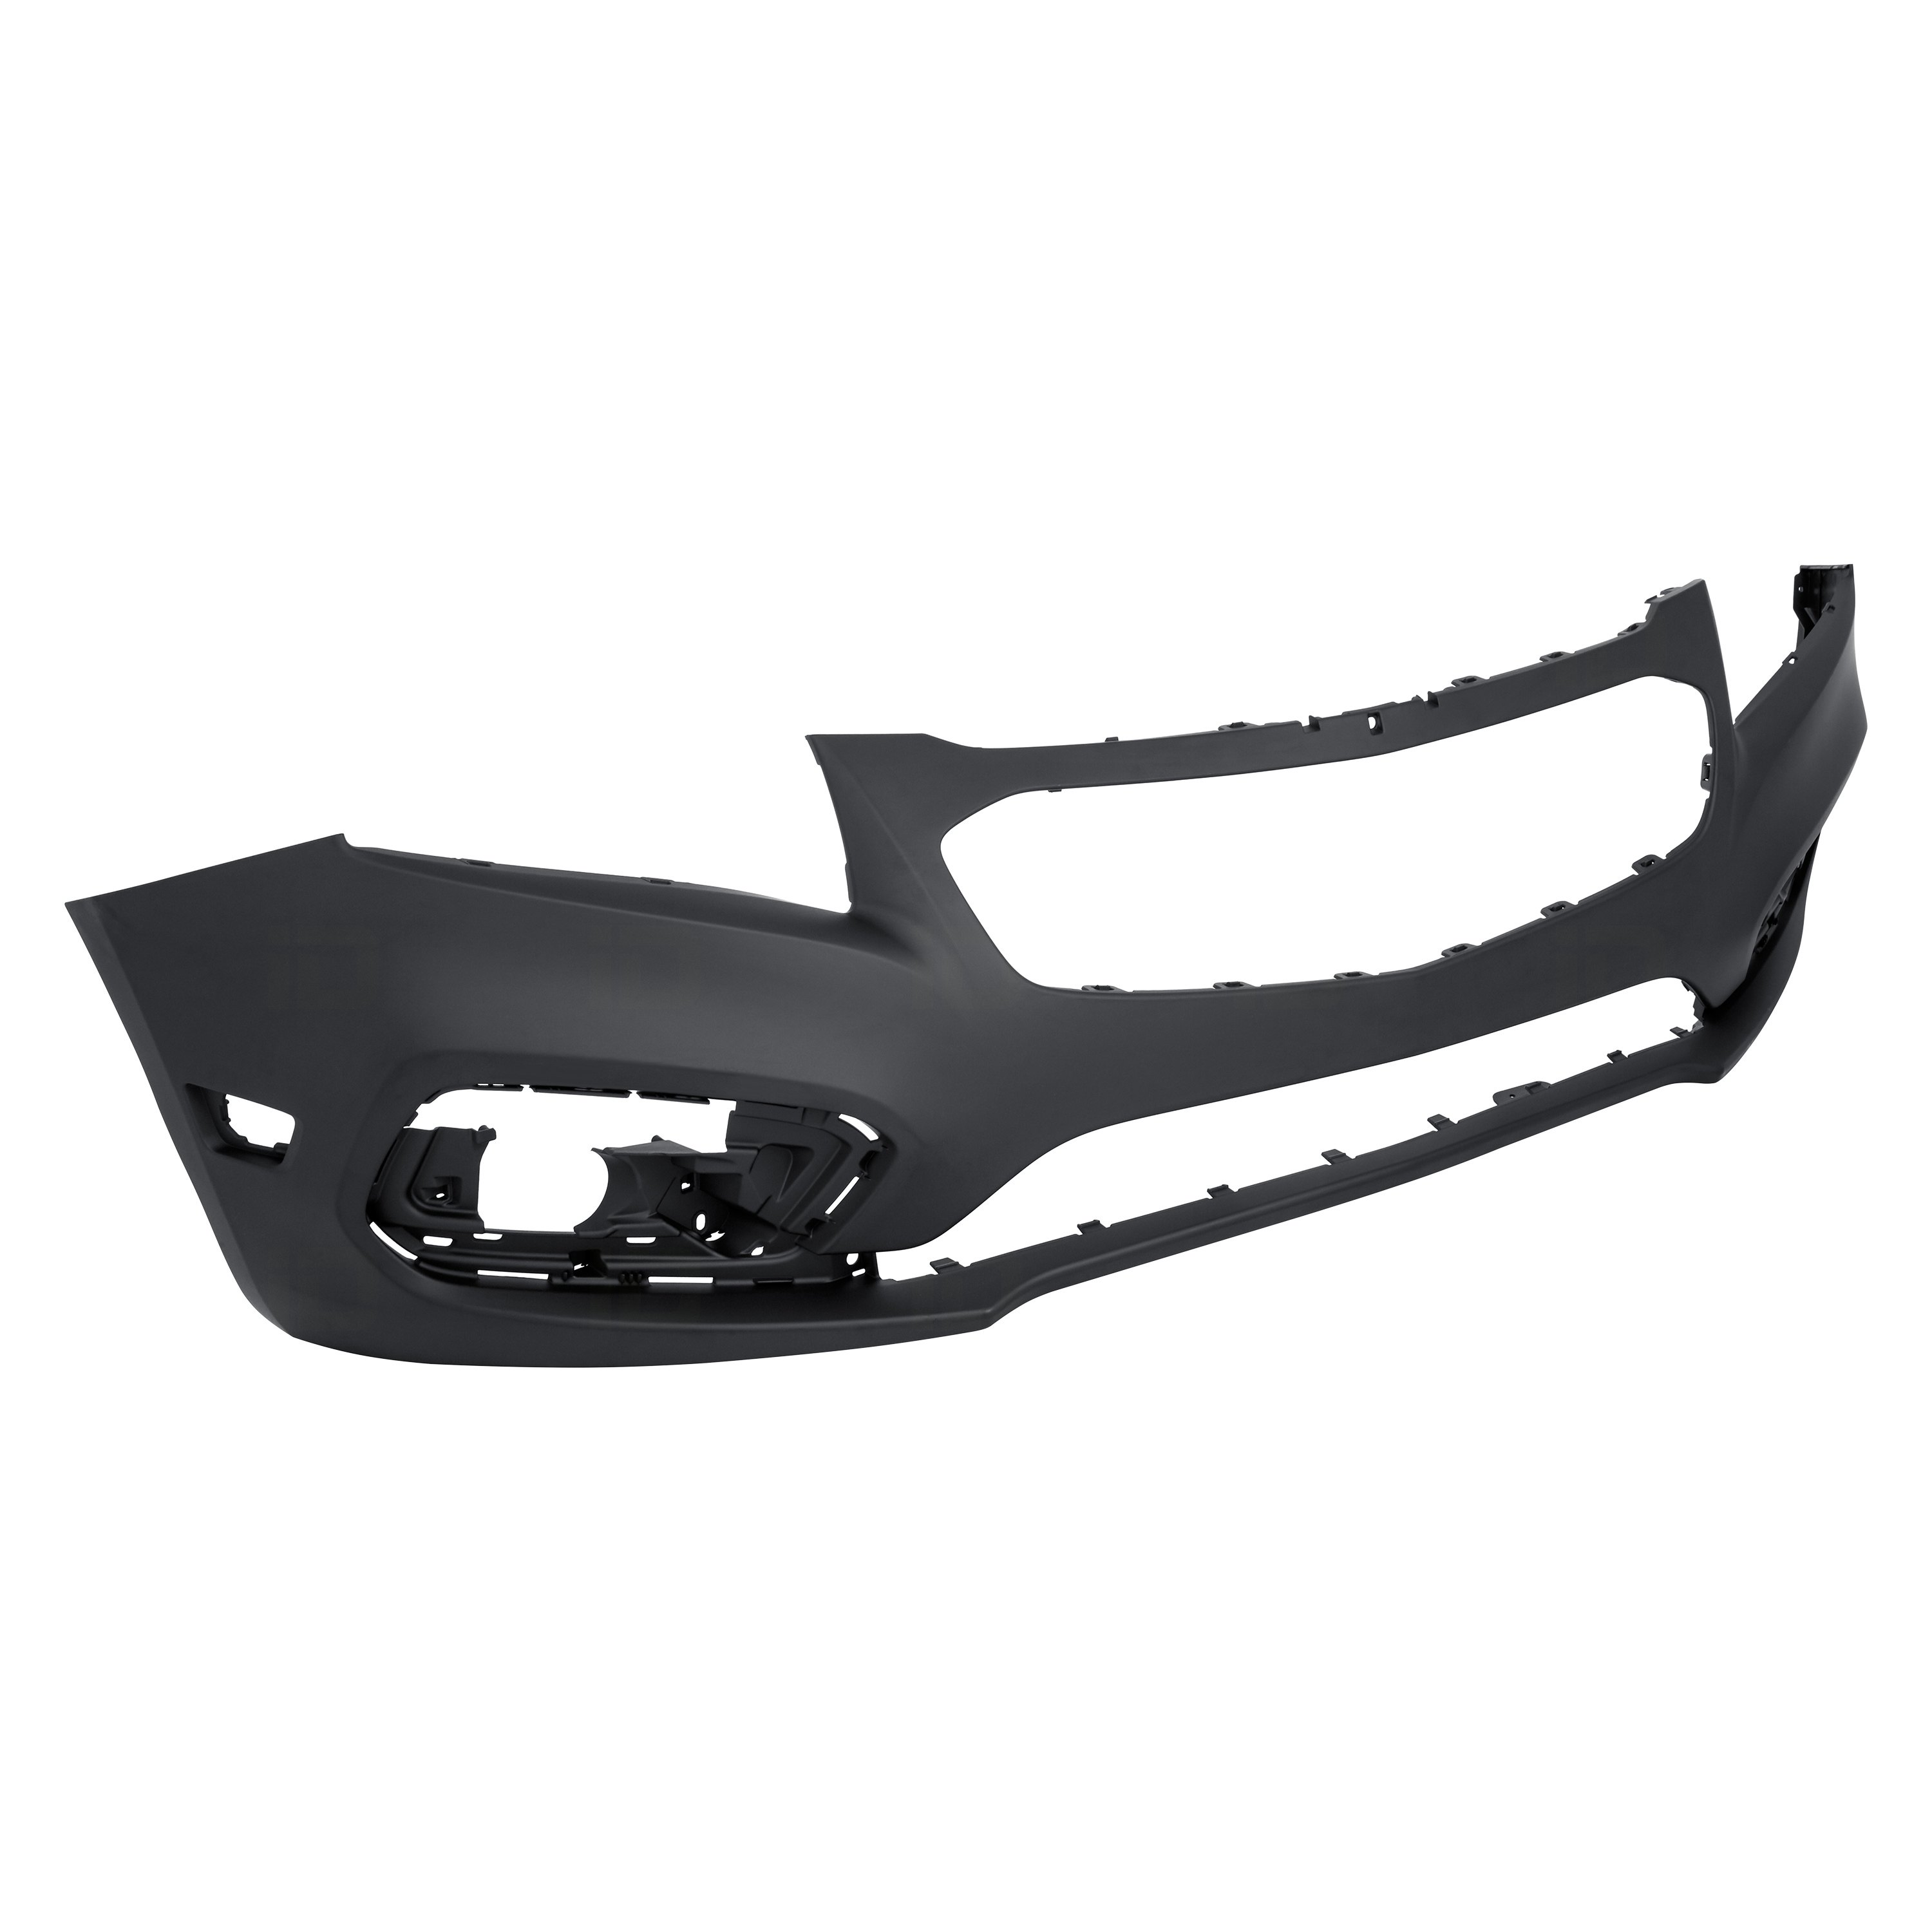 Partomotive For 94-02 Chevy C/K-Series Pickup Truck Front Bumper Filler w/o 15000 GVW 12376285